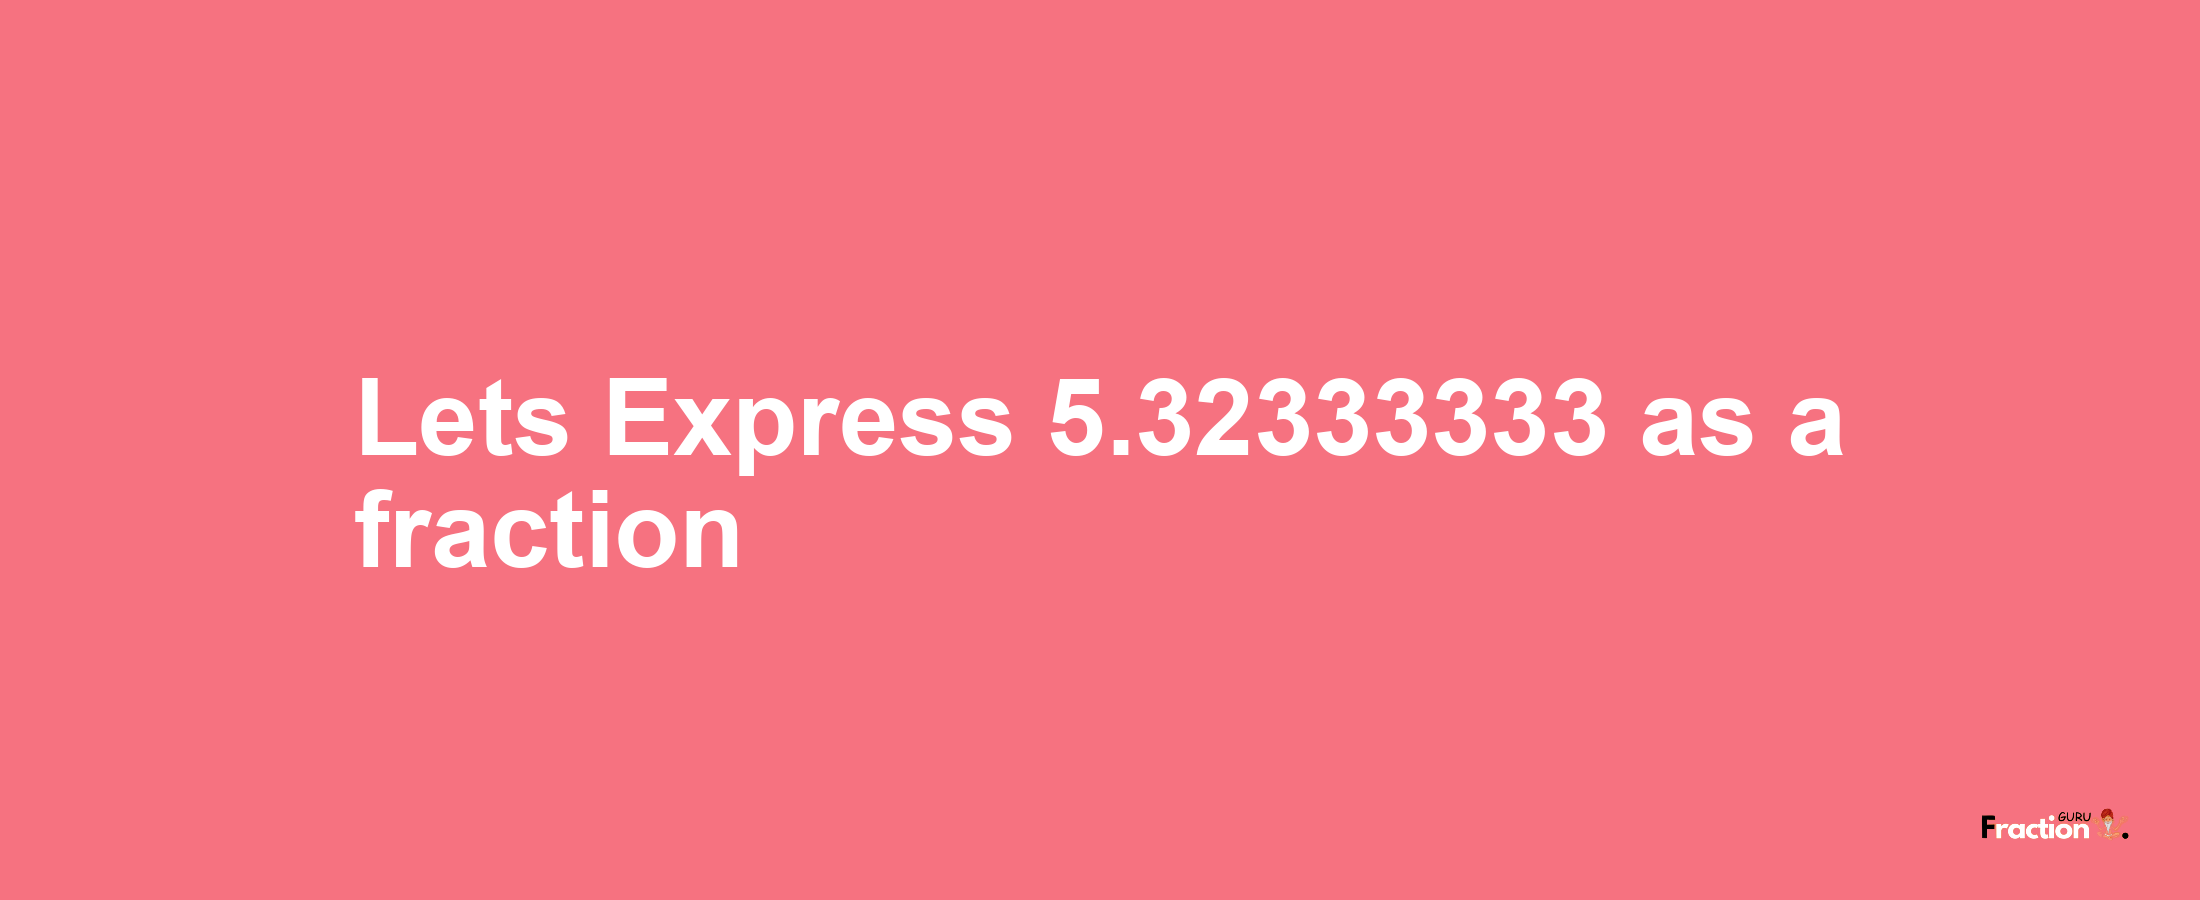 Lets Express 5.32333333 as afraction